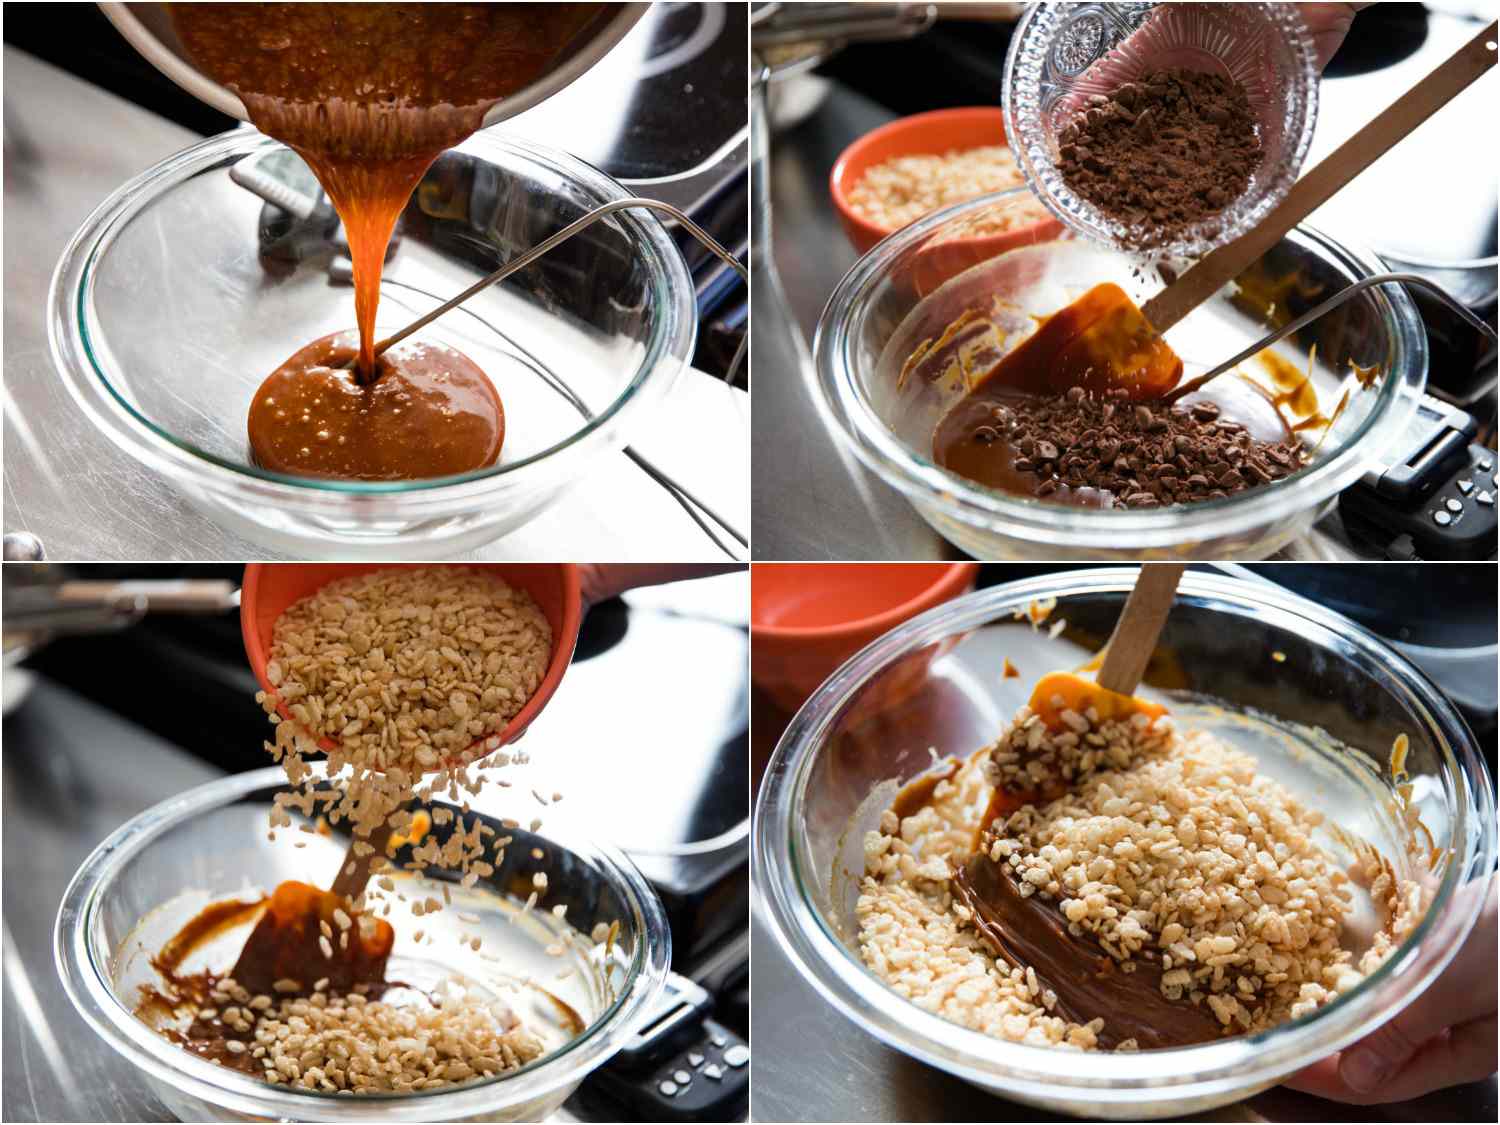 Composite illustrating assembly of cookie: pouring caramel into a glass bowl, folding in chopped milk chocolate and Rice Krispies